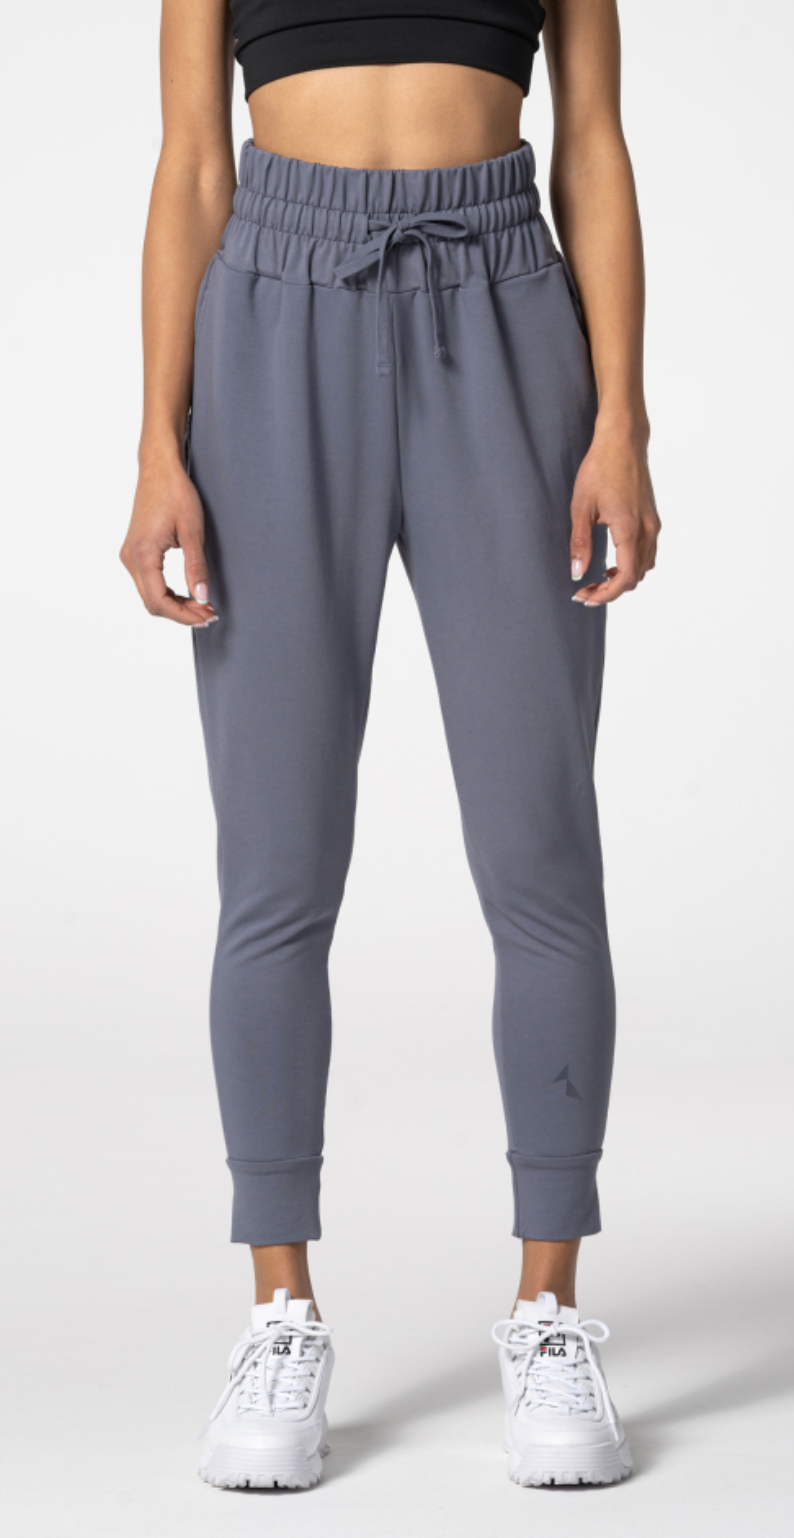 Carpatree Fair Sweatpants - Grey jogger style tracksuit bottoms with deep elasticated high waist that ties and pockets. Made of strong stretch cotton.